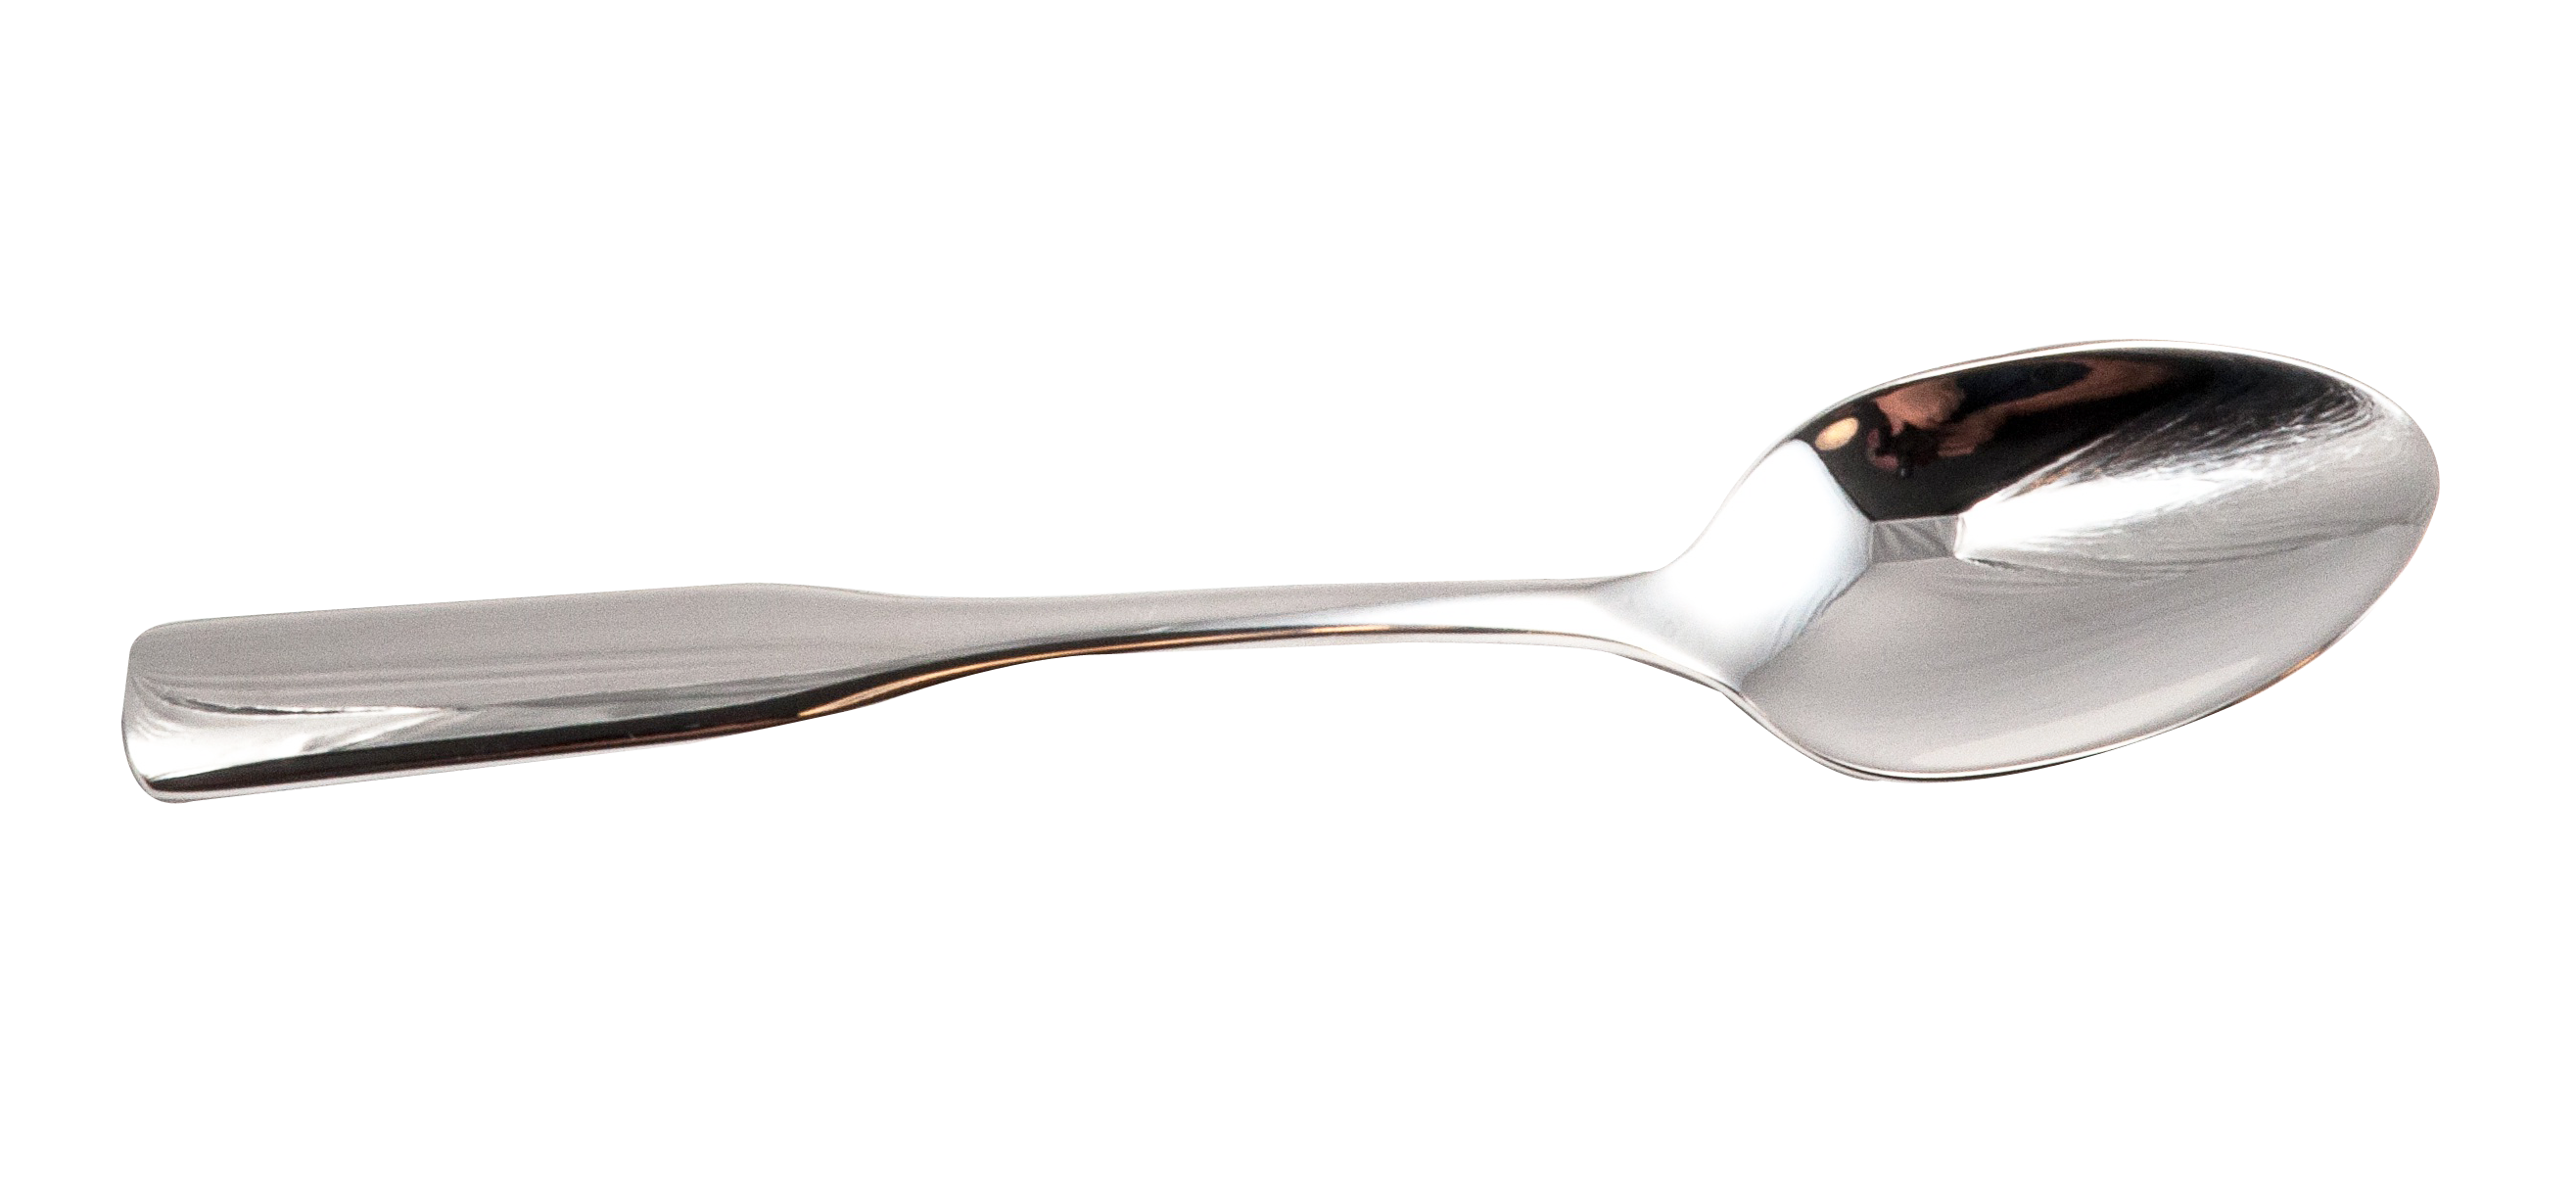 Spoon Png Transparent Image   Spoon Png - Spoon, Transparent background PNG HD thumbnail